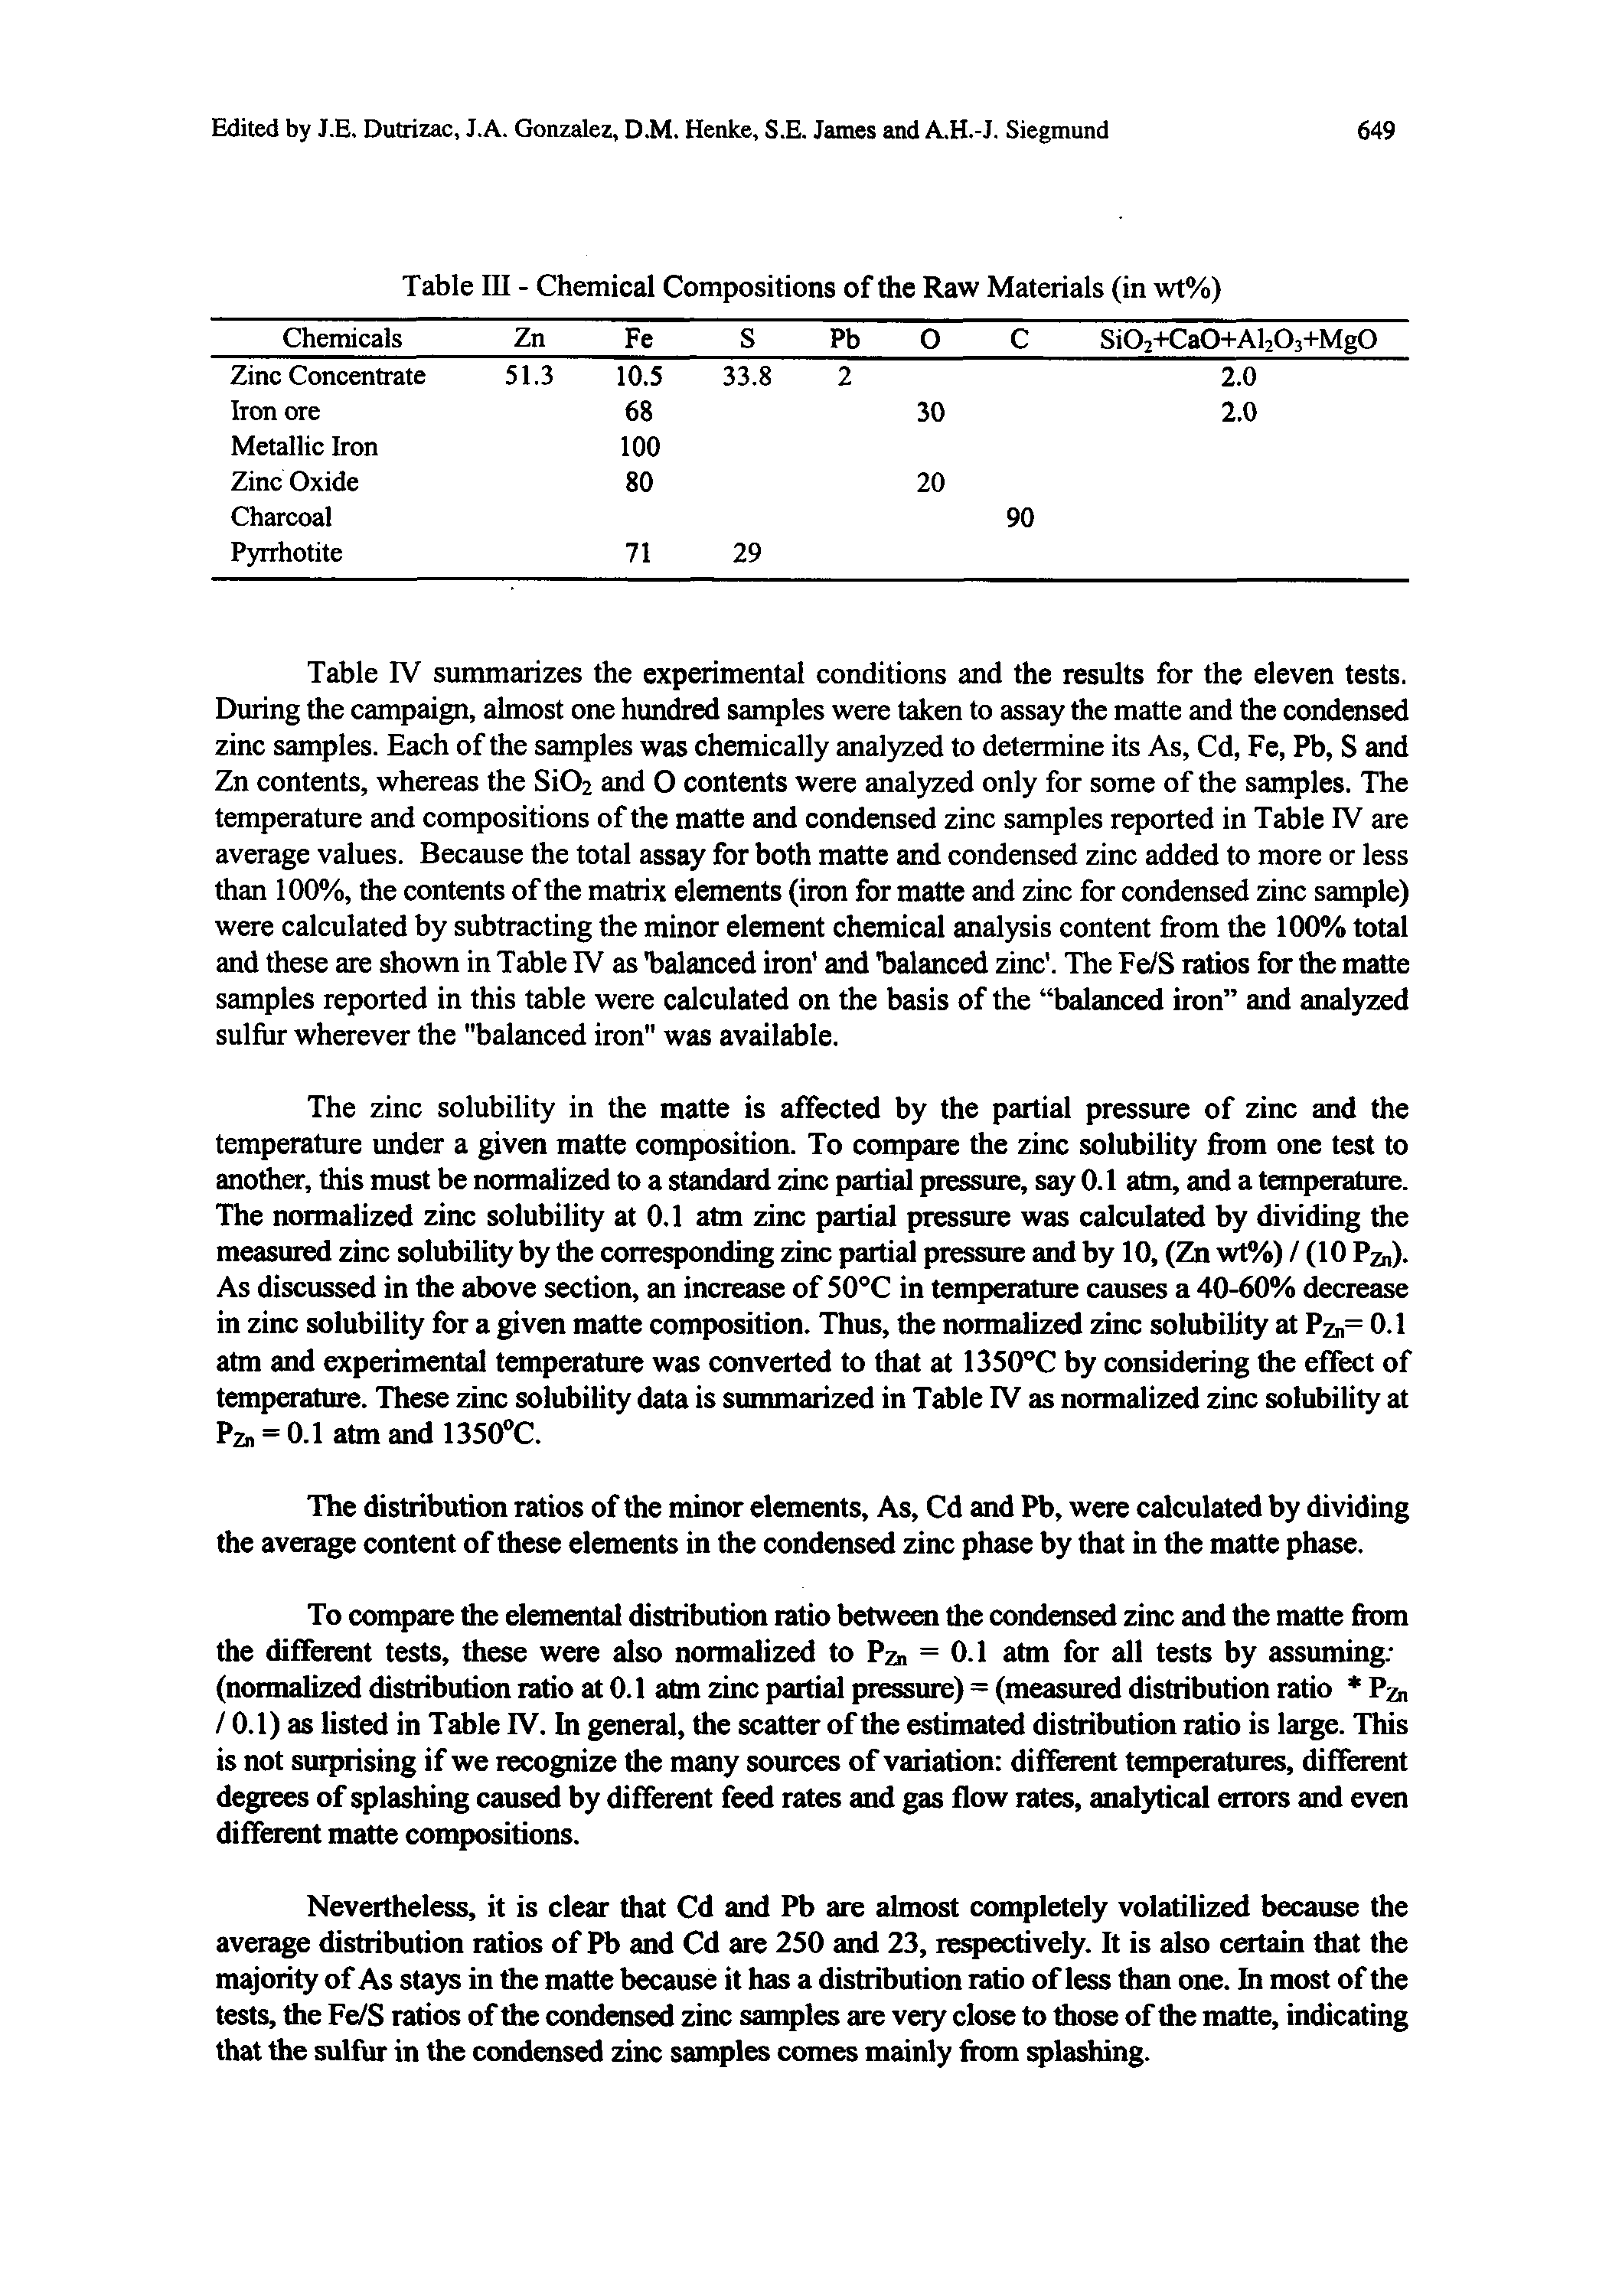 Table IV summarizes the experimental conditions and the results for the eleven tests. During the campaign, almost one hundred samples were taken to assay the matte and the condensed zinc samples. Each of the samples was chemically analyzed to determine its As, Cd, Fe, Pb, S and Zn contents, whereas the Si02 and O contents were analyzed only for some of the samples. The temperature and compositions of the matte and condensed zinc samples reported in Table IV are average values. Because the total assay for both matte and condensed zinc added to more or less than 100%, the contents of the matrix elements (iron for matte and zinc for condensed zinc sample) were calculated by subtracting the minor element chemical analysis content from the 100% total and these are shown in Table IV as balanced iron and balanced zinc. The Fe/S ratios for flie matte samples reported in this table were calculated on the basis of the balanced iron and analyzed sulfhr wherever the "balanced iron" was available.